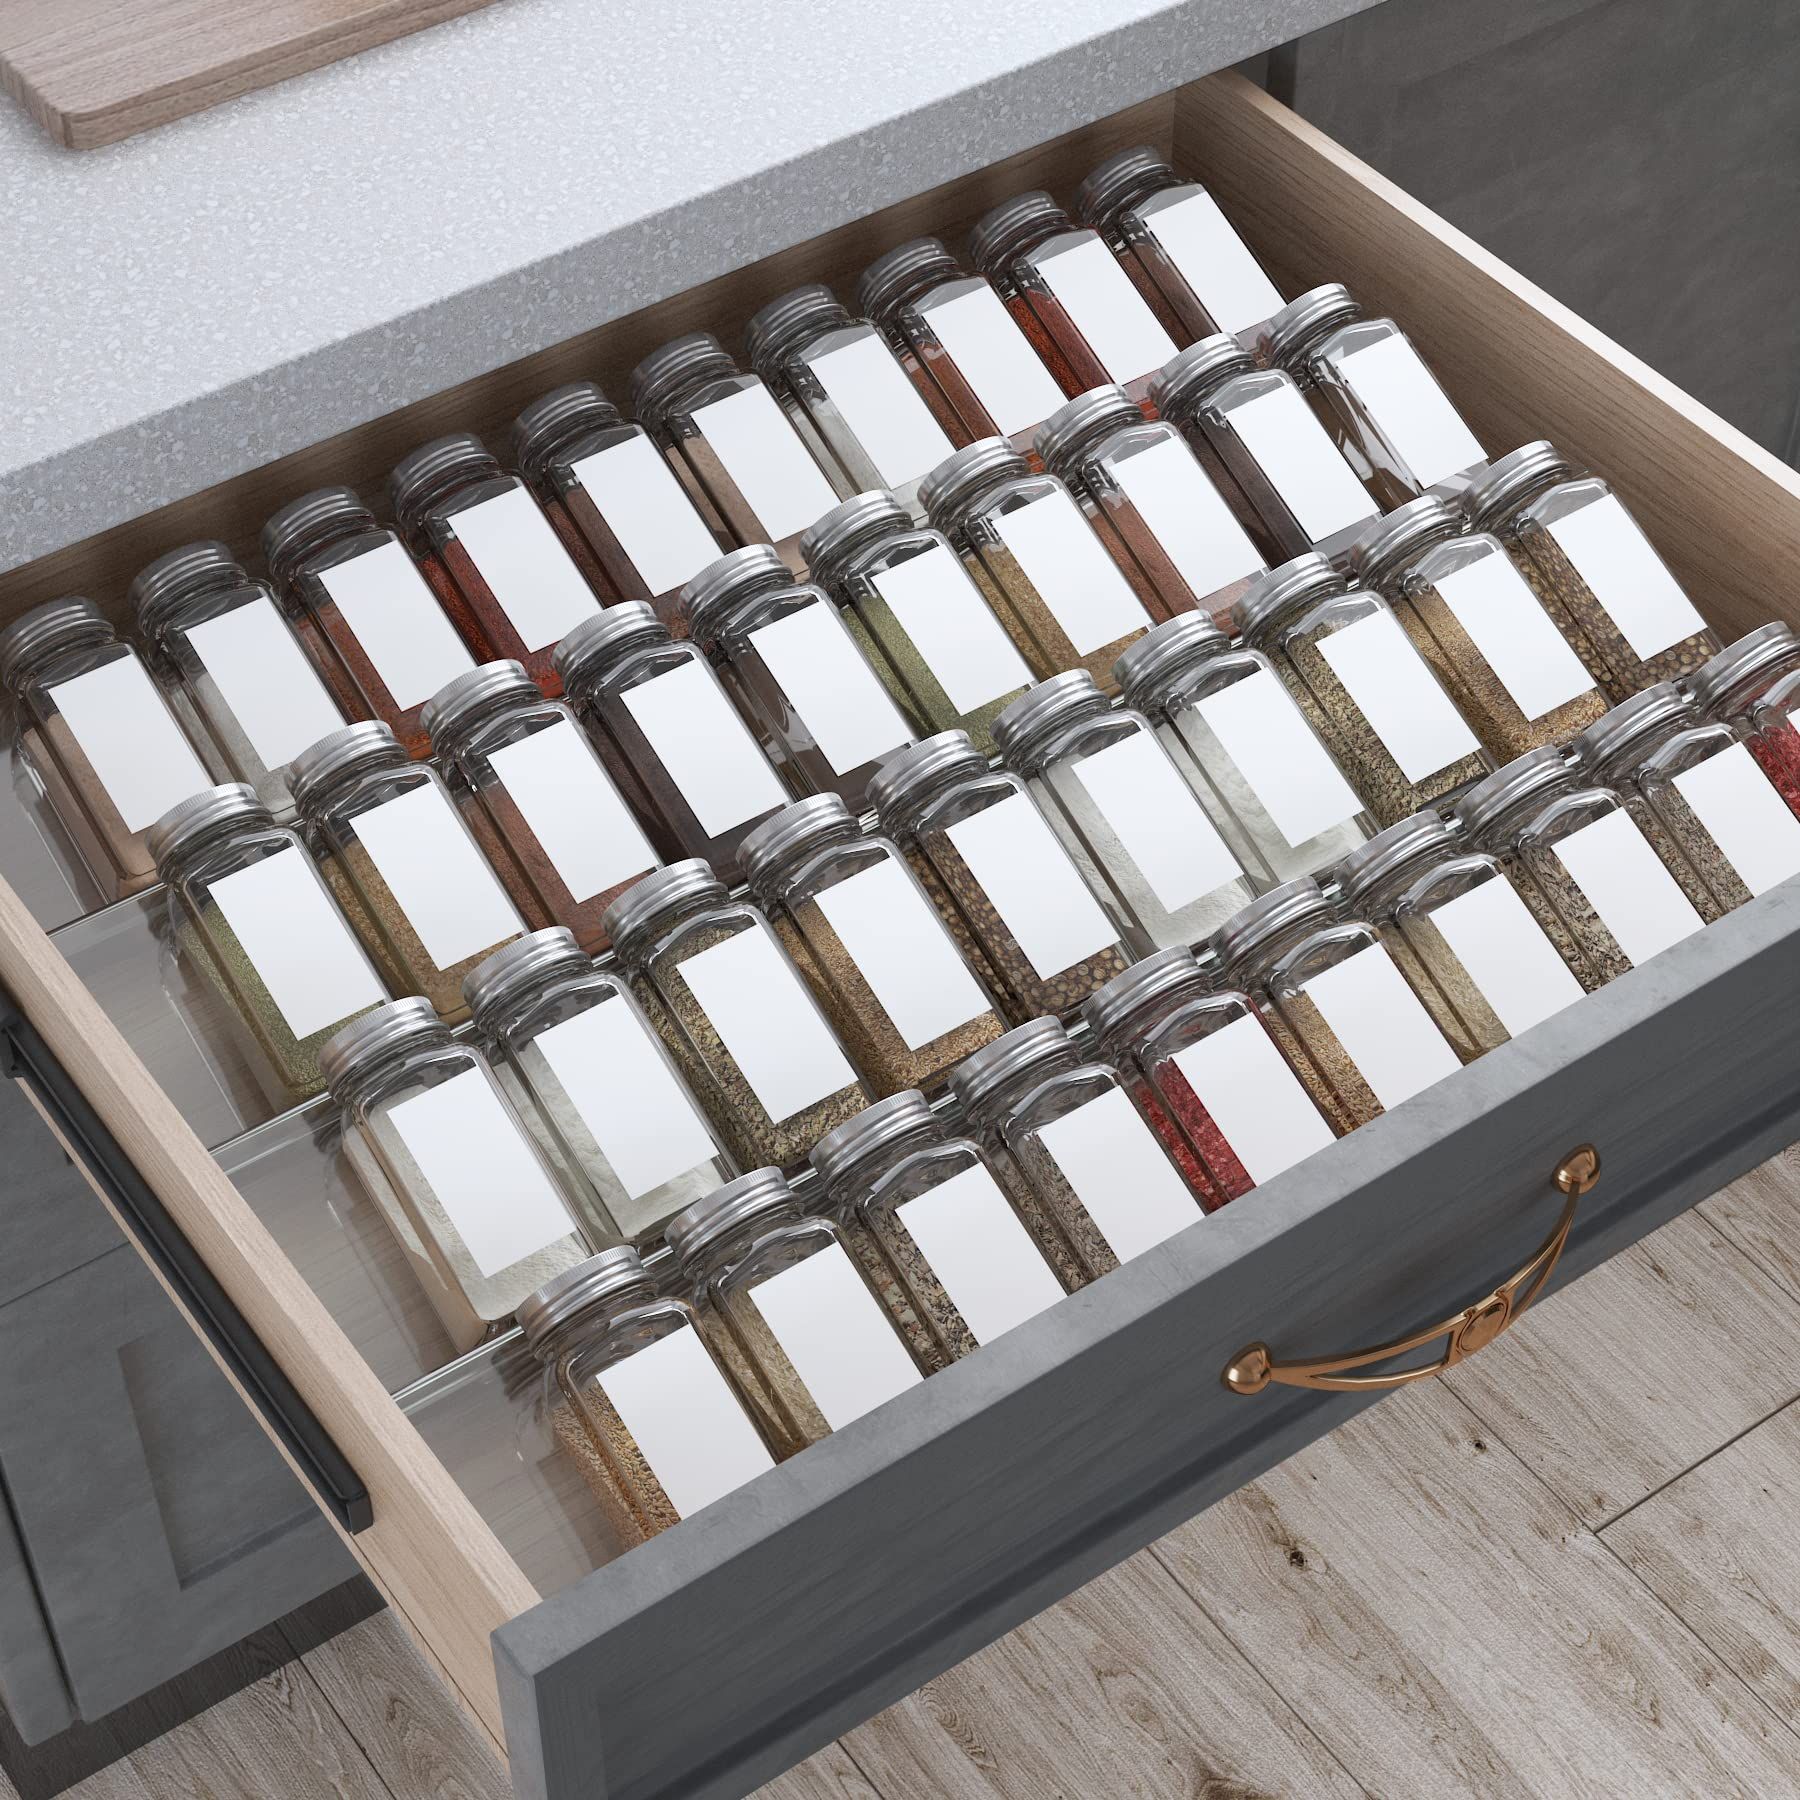 Spice Drawer Organizer, 4 Tiers 2 Set Clear Acrylic Slanted in Drawer Seasoning Jars Insert, Expandable From 13" to 26", Hold up 56 Spice Jars Kitchen Countertop Rack Tray (Jars not Include) | Amazon (US)